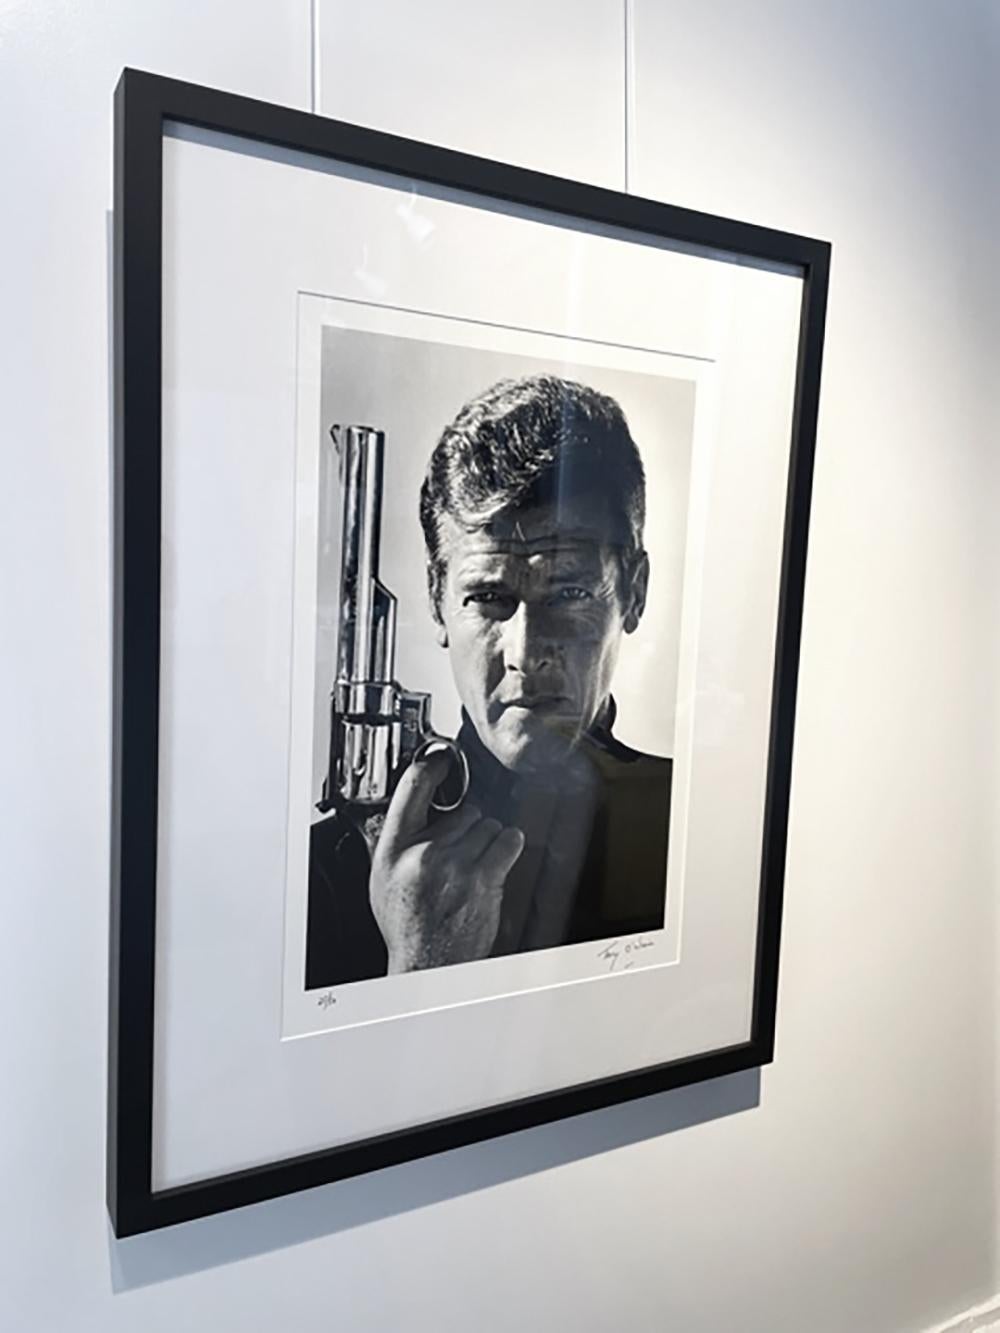 Roger Moore 007 Edition 25/50 Digitally Signed - Gray Portrait Photograph by Terry O'Neill